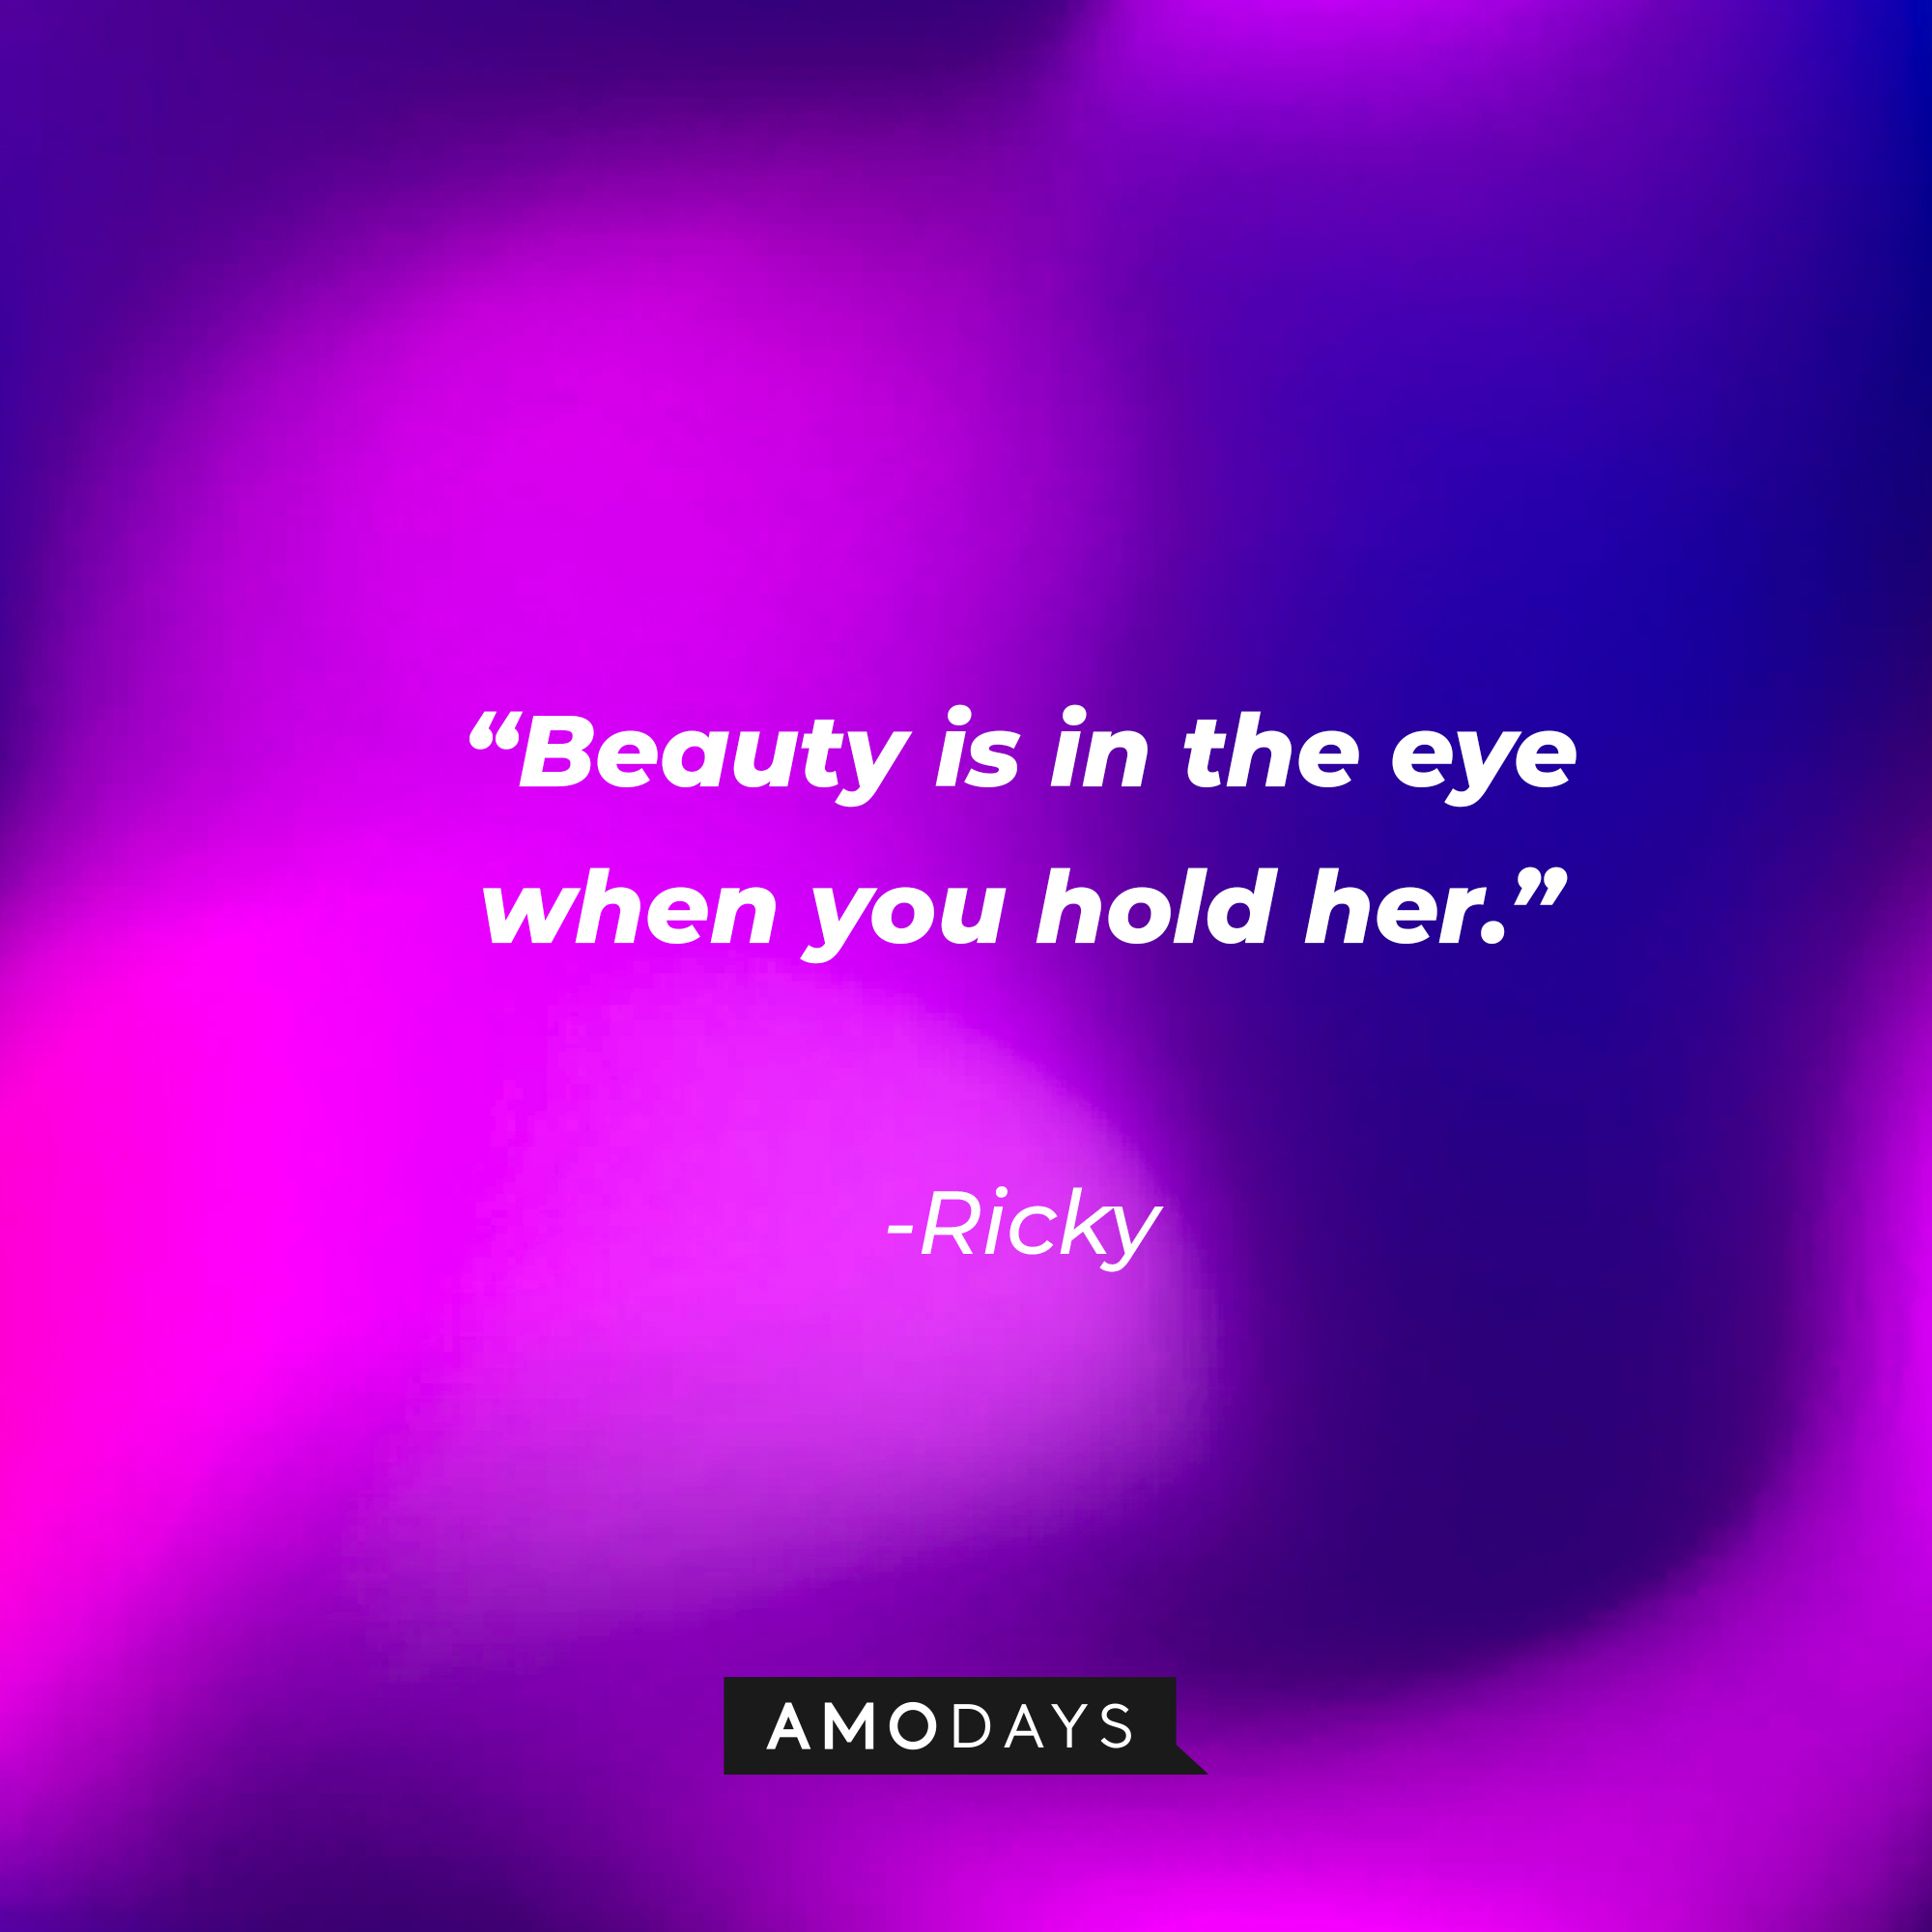 Ricky's quote: “Beauty is in the eye when you hold her.” | Source: Amodays